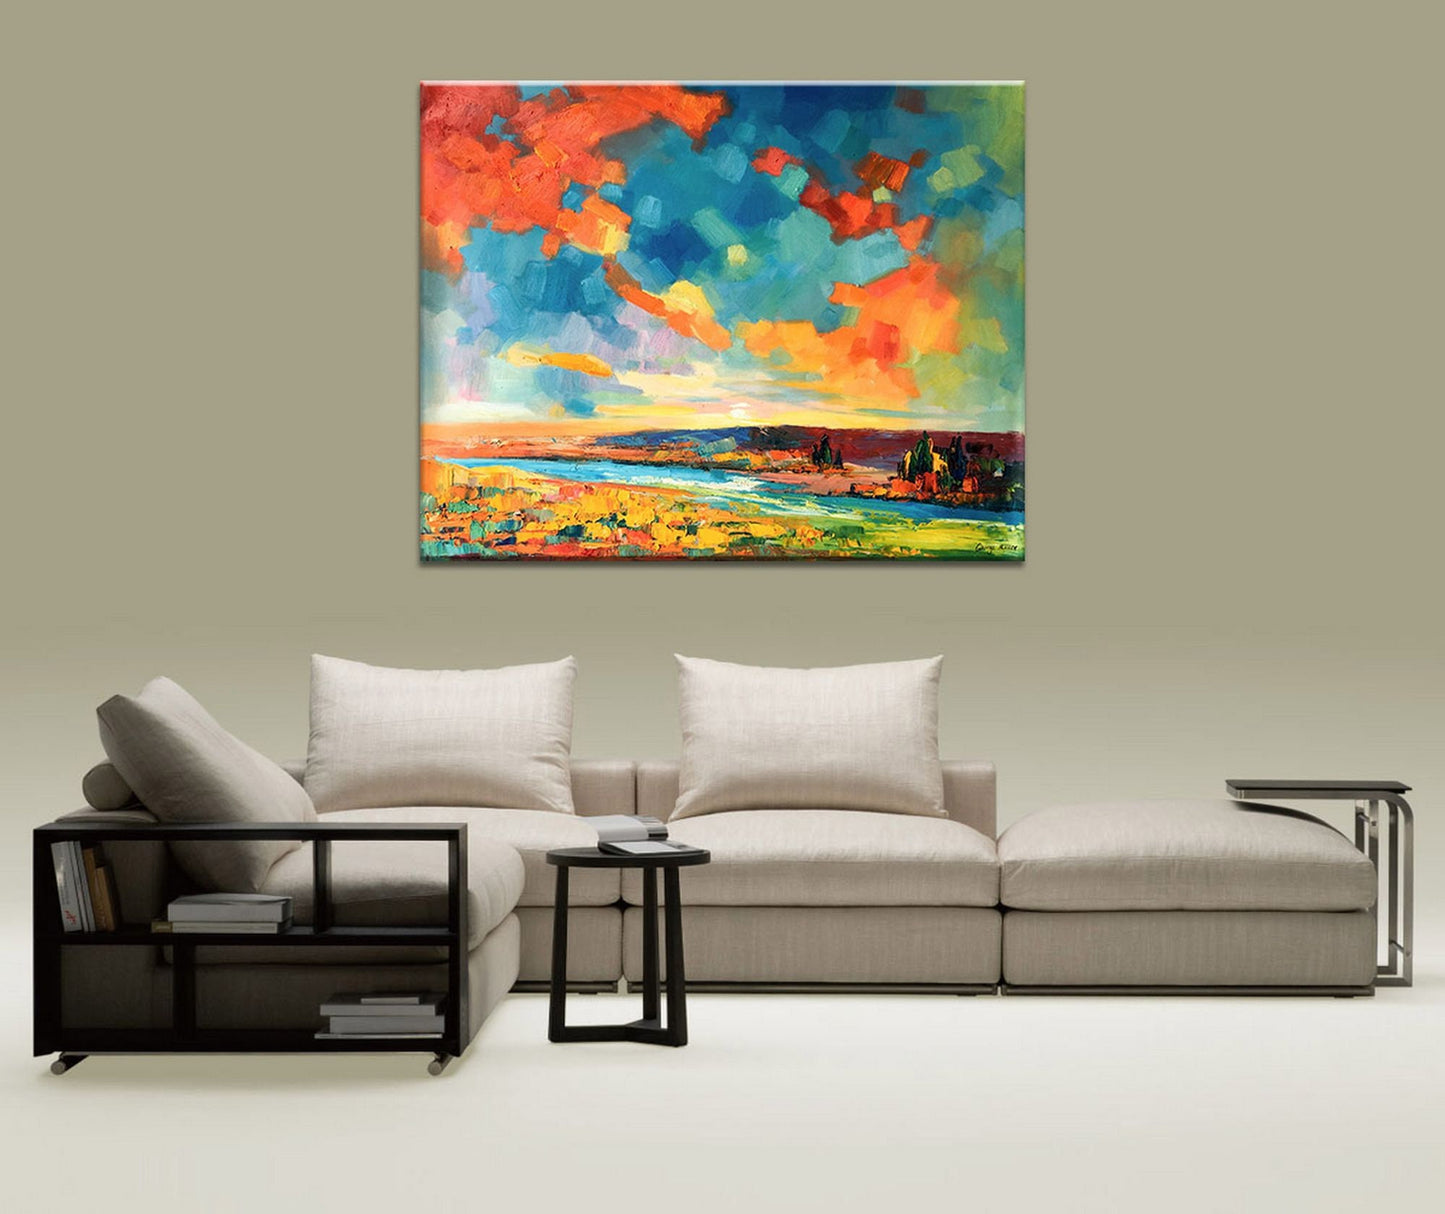 Abstract Landscape Oil Painting Sky By The River, Canvas Wall Art, Wall Art Painting, Canvas Wall Art Abstract, Oversized Painting On Canvas